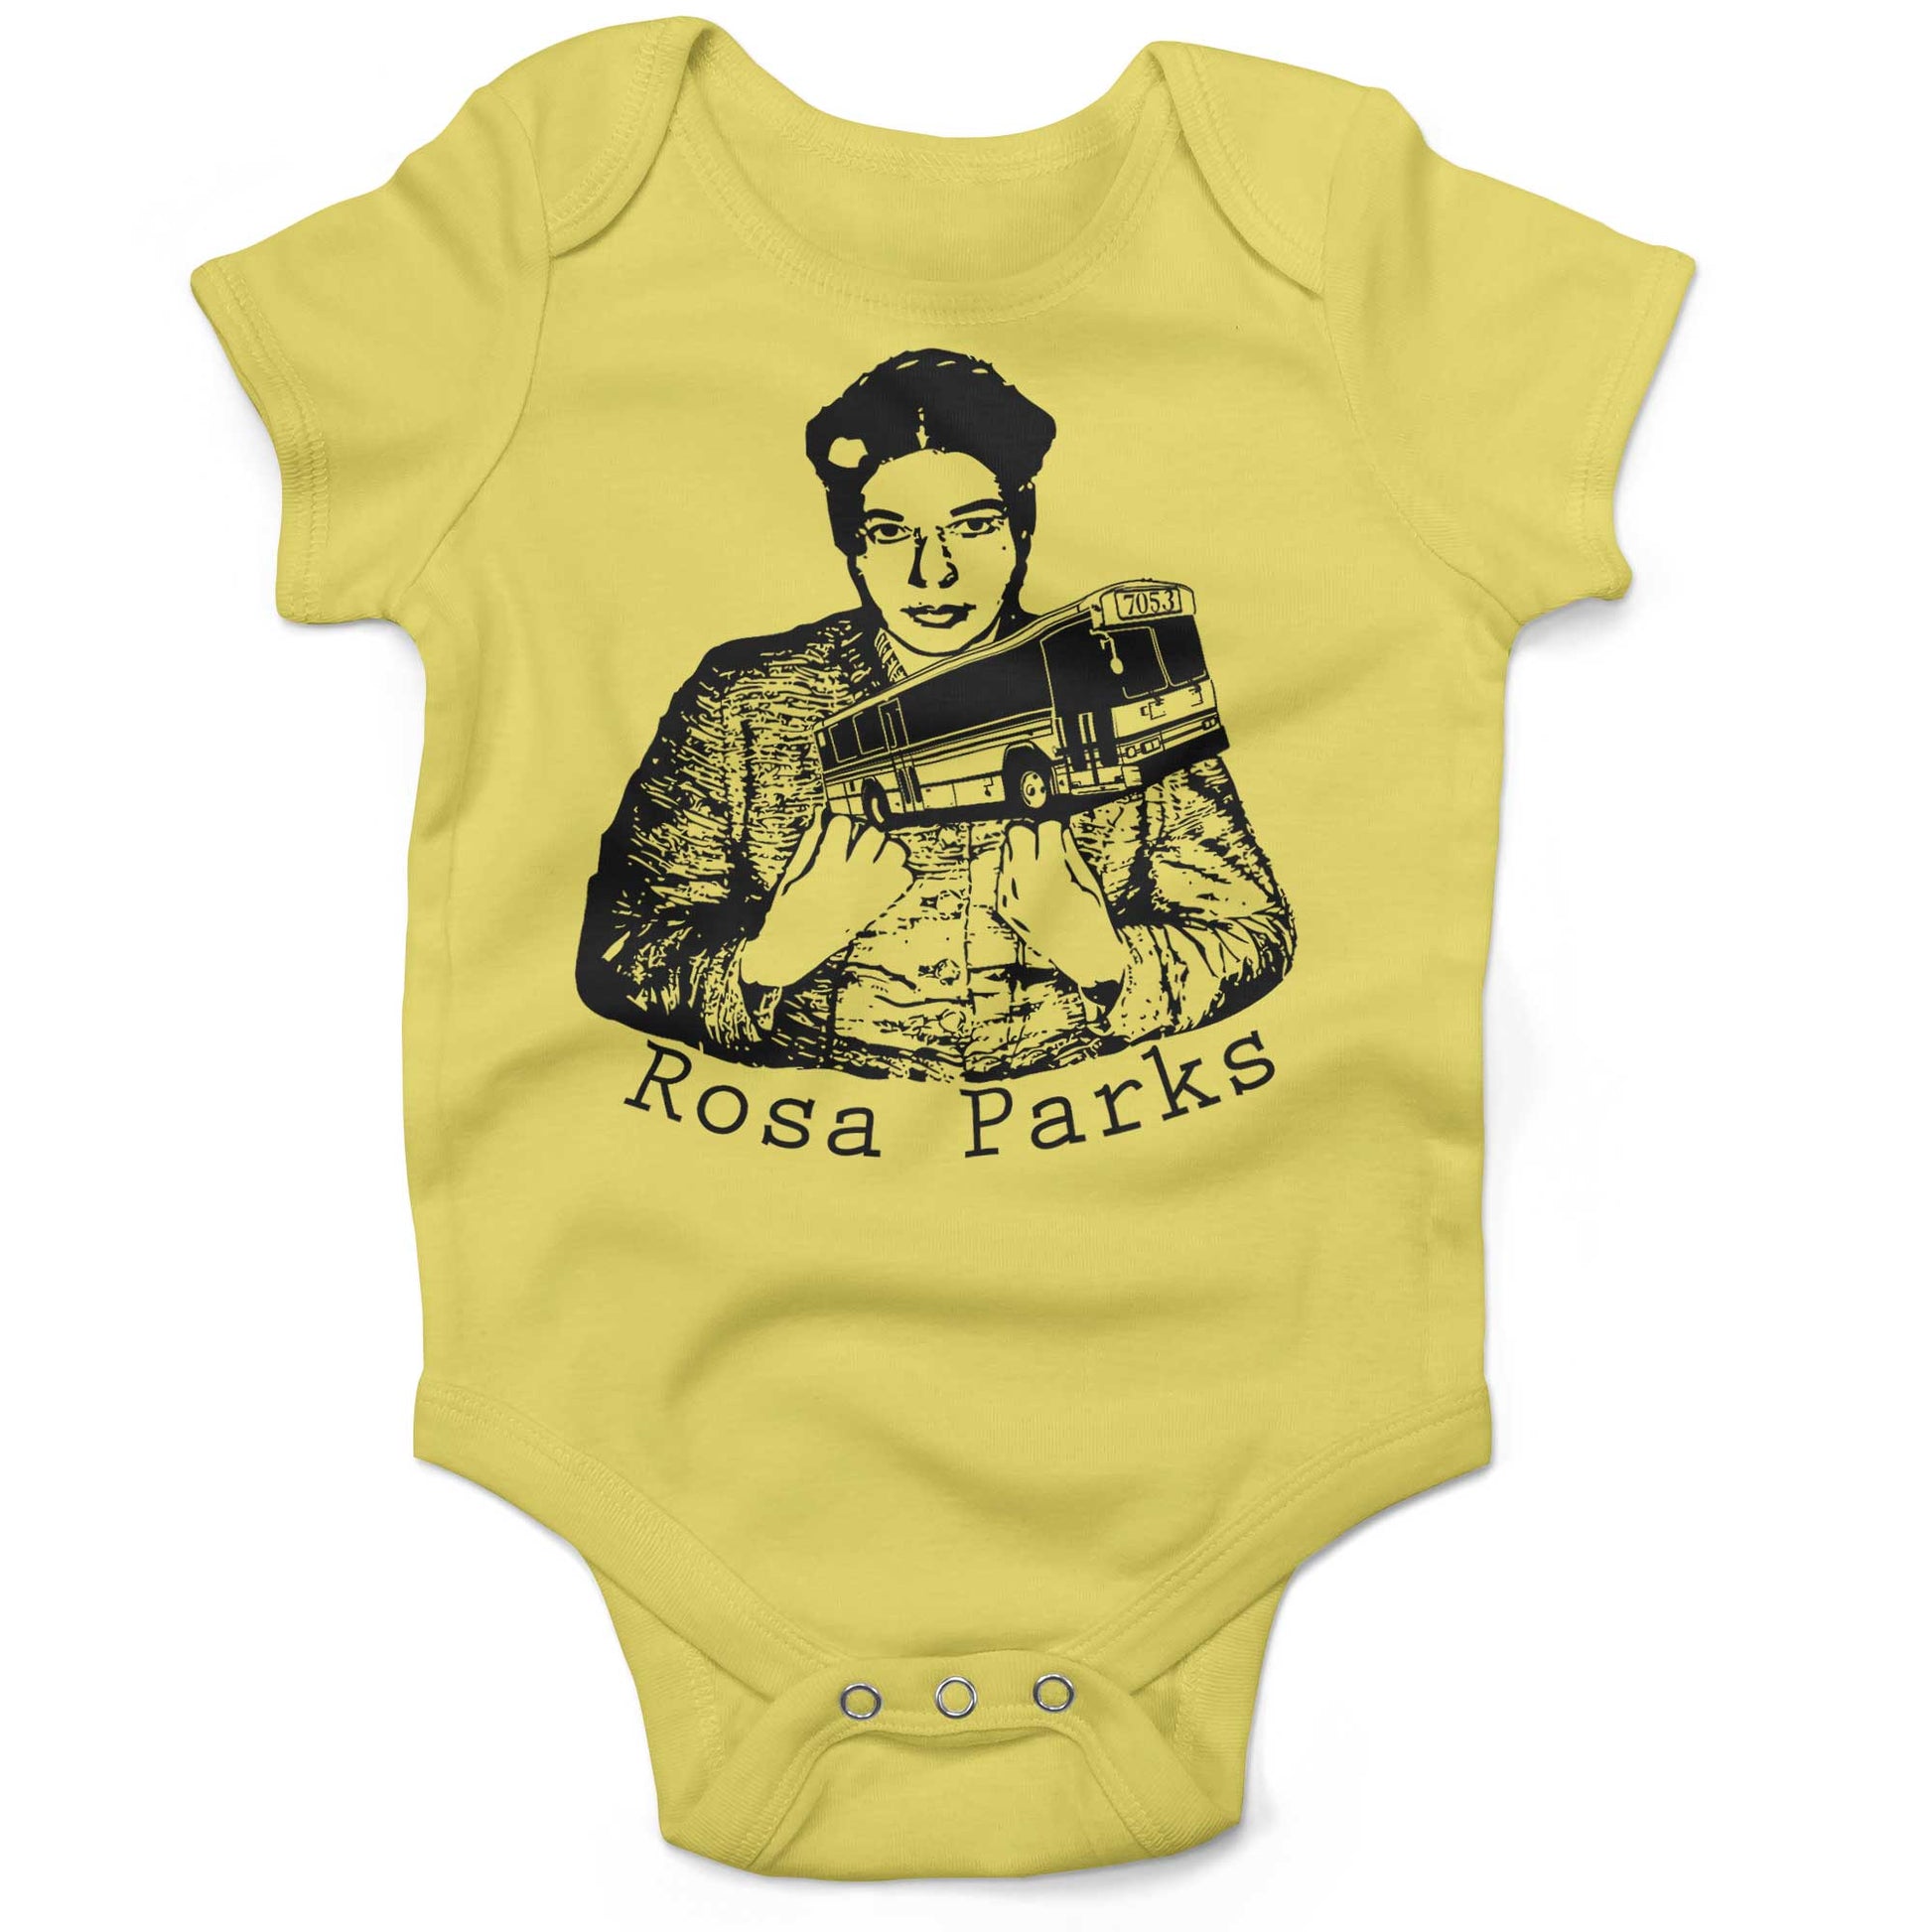 Rosa Parks Infant Bodysuit or Raglan Baby Tee-Yellow-3-6 months